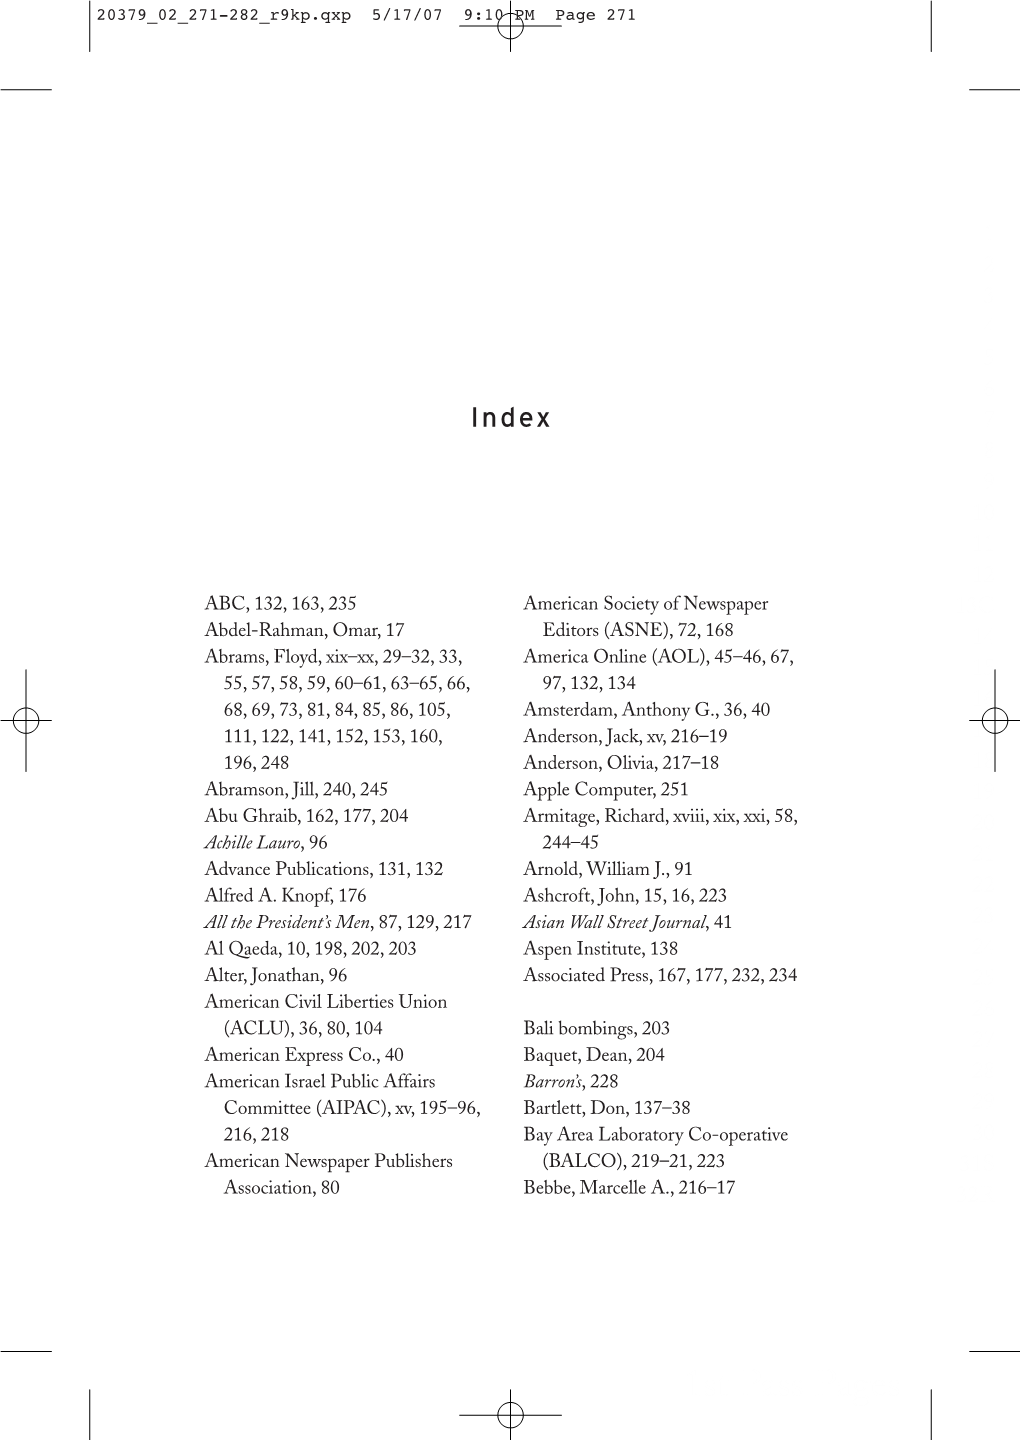 Download a PDF of the Index